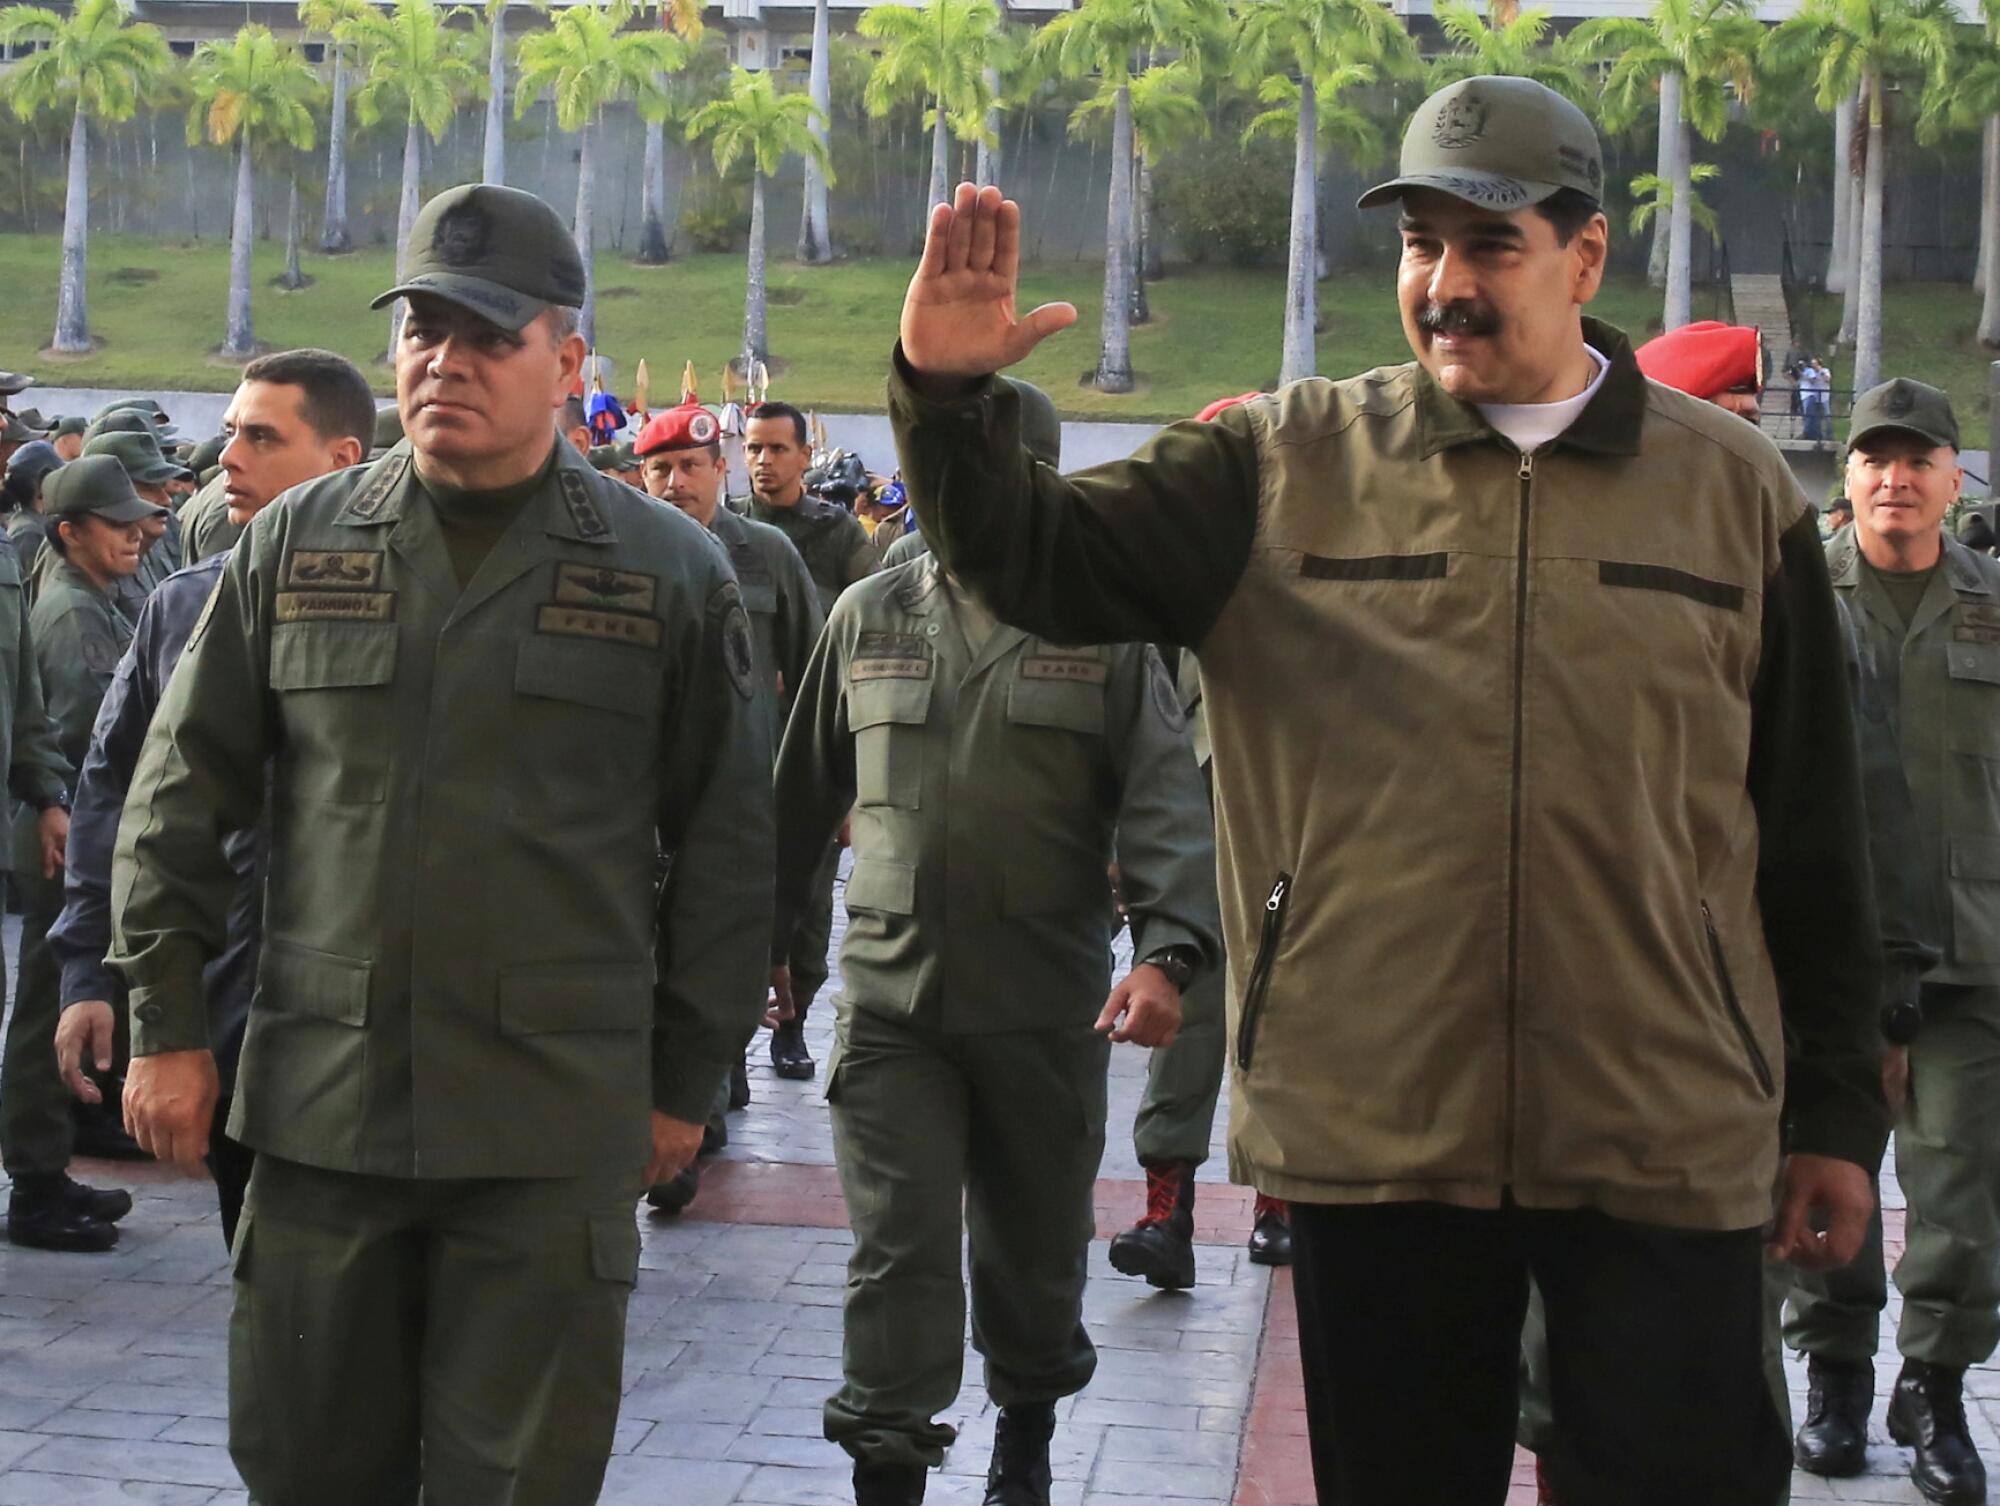 A man with a mustache in khaki-colored jacket and cap waves as other people in military fatigues walk near him 